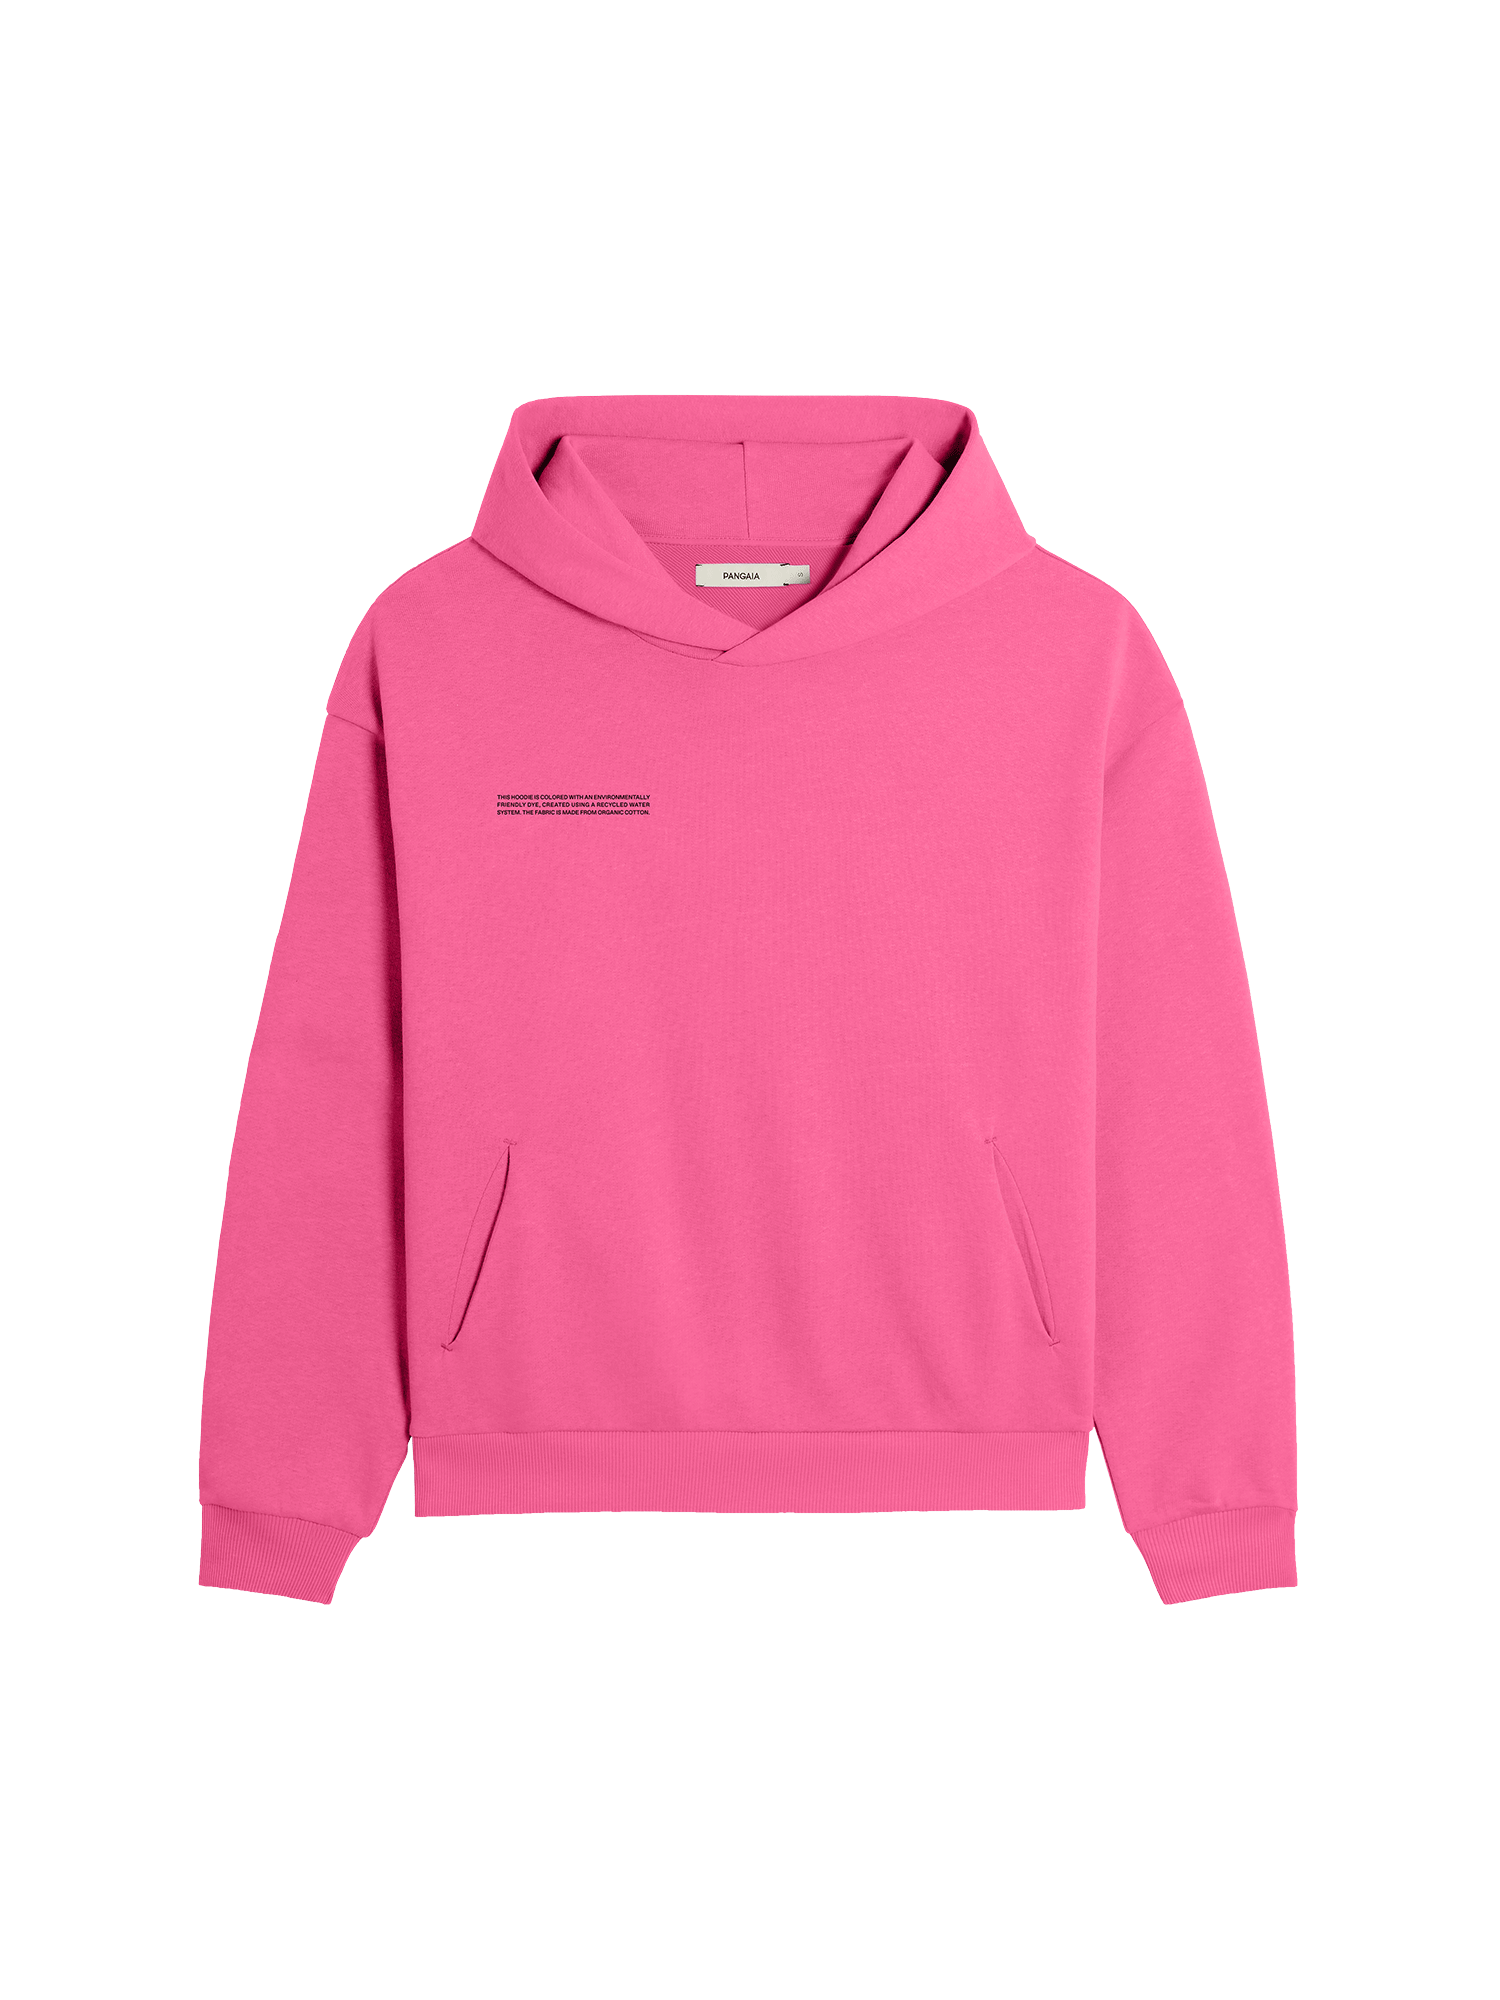 https://storage.googleapis.com/download/storage/v1/b/whering.appspot.com/o/marketplace_product_images%2Fpangaia-archive-lightweight-recycled-cotton-hoodieflamingo-pink-fa6RN2YcEx7PUTAGoPskKF.png?generation=1692162036411152&alt=media